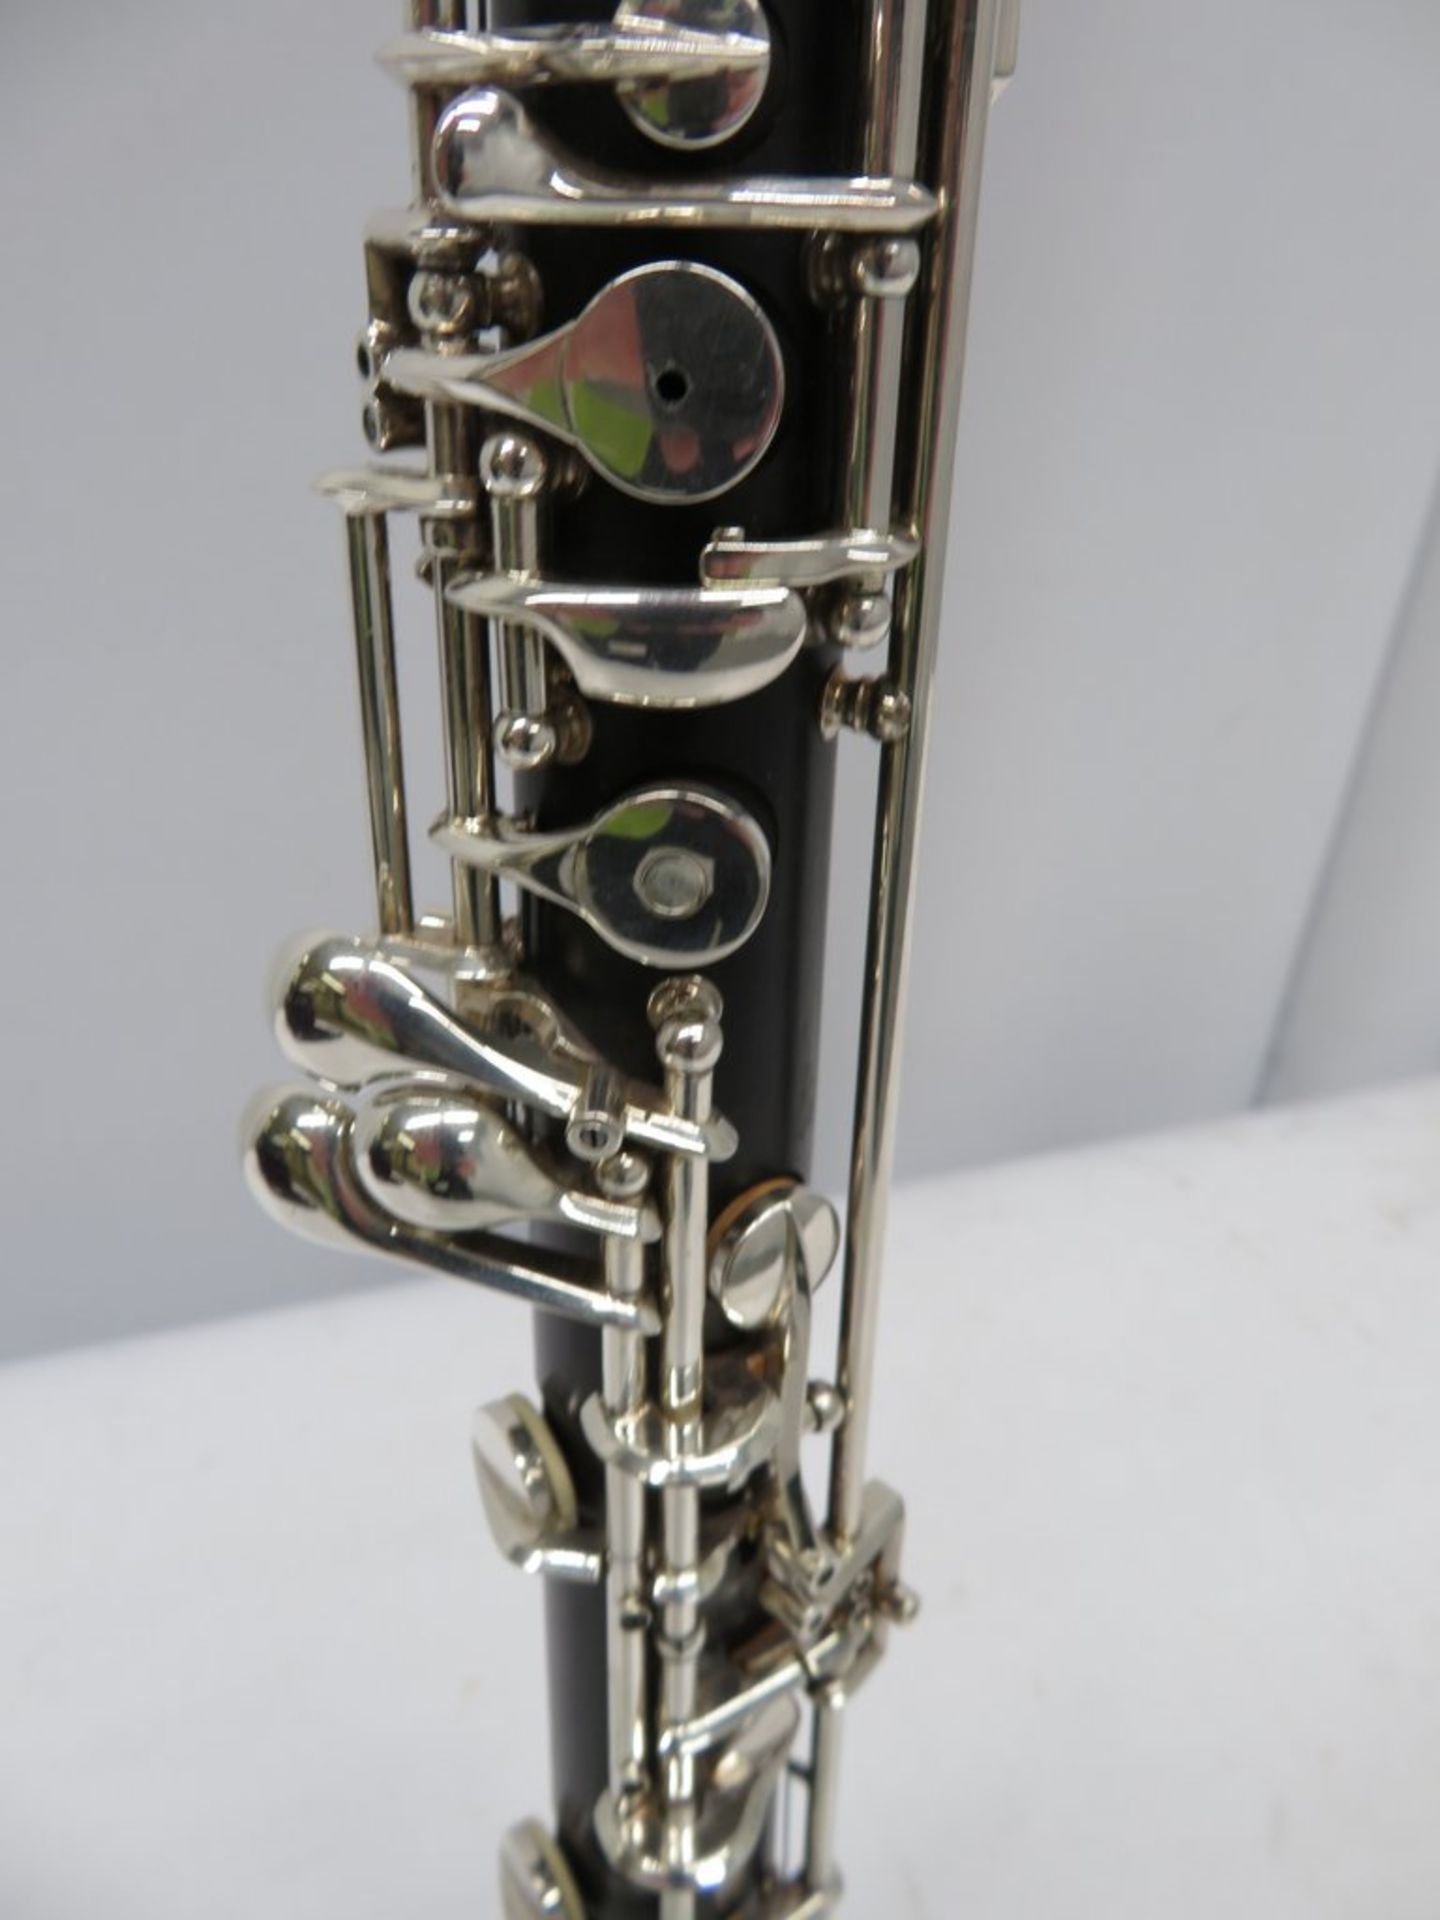 Buffet Crampon Oboe With Case. Serial Number: 9563. Please Note That This Item Has Not Bee - Image 10 of 18